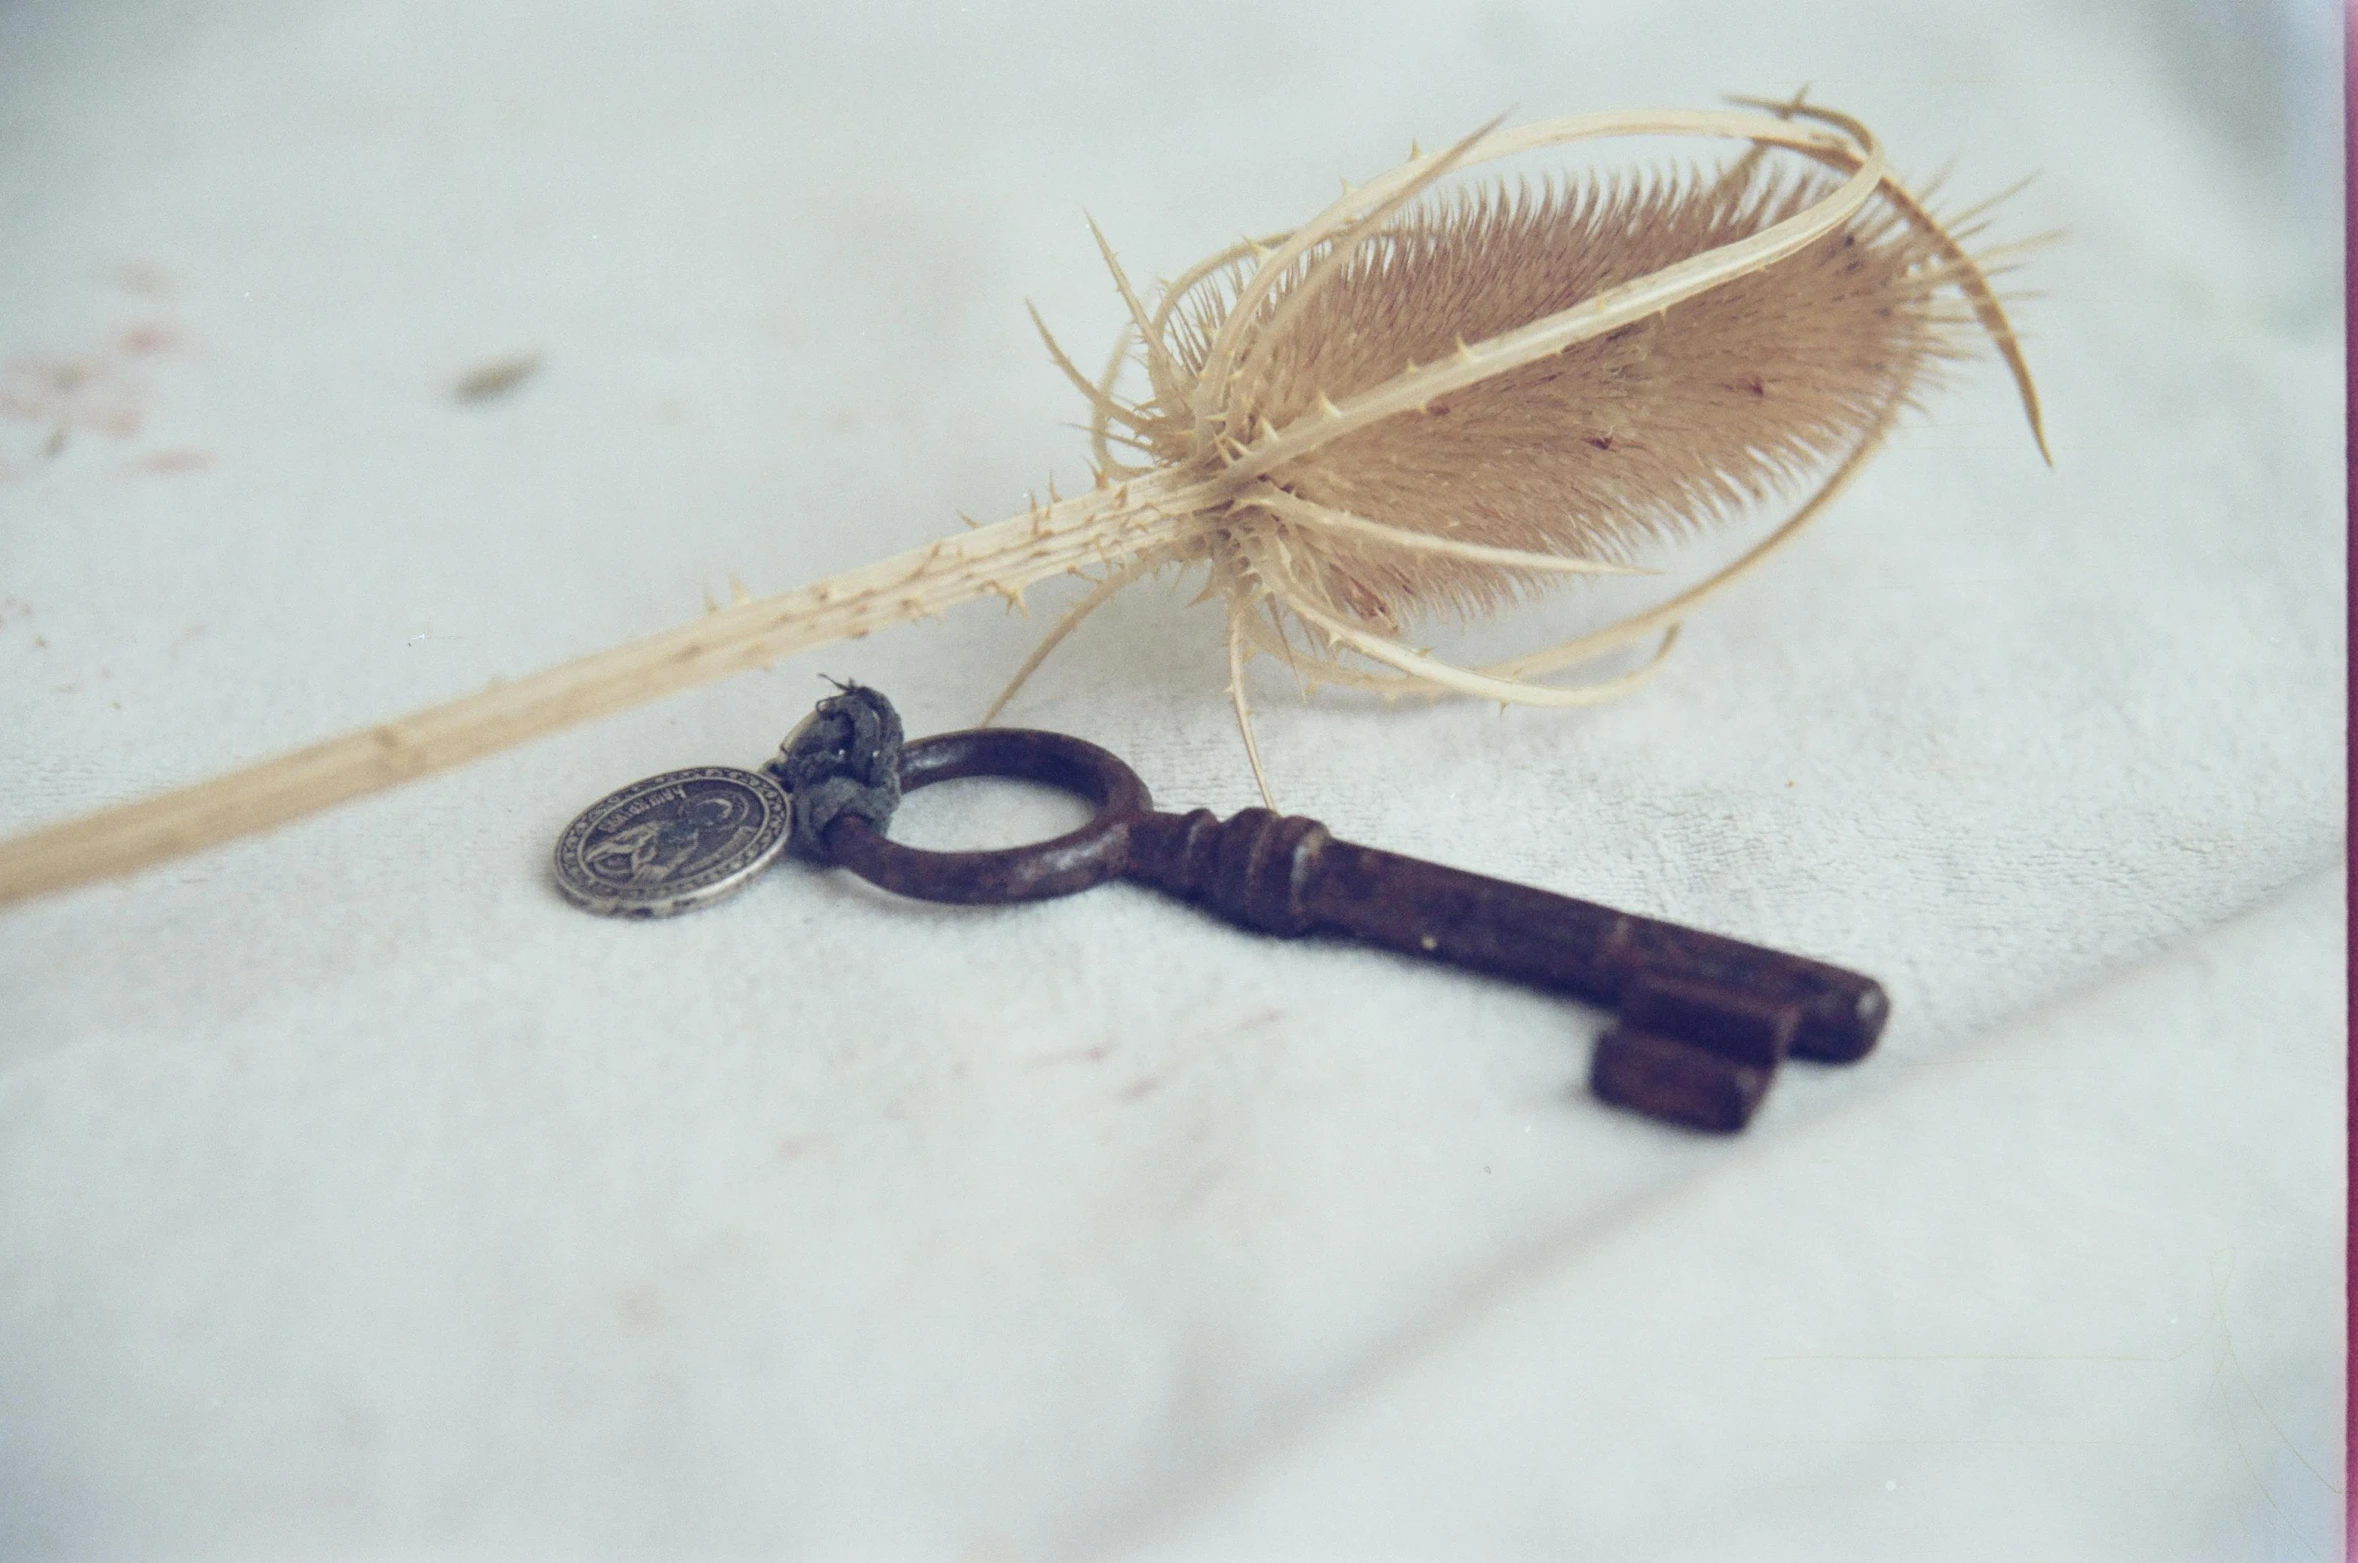 a broken old key is lying next to a dried feather